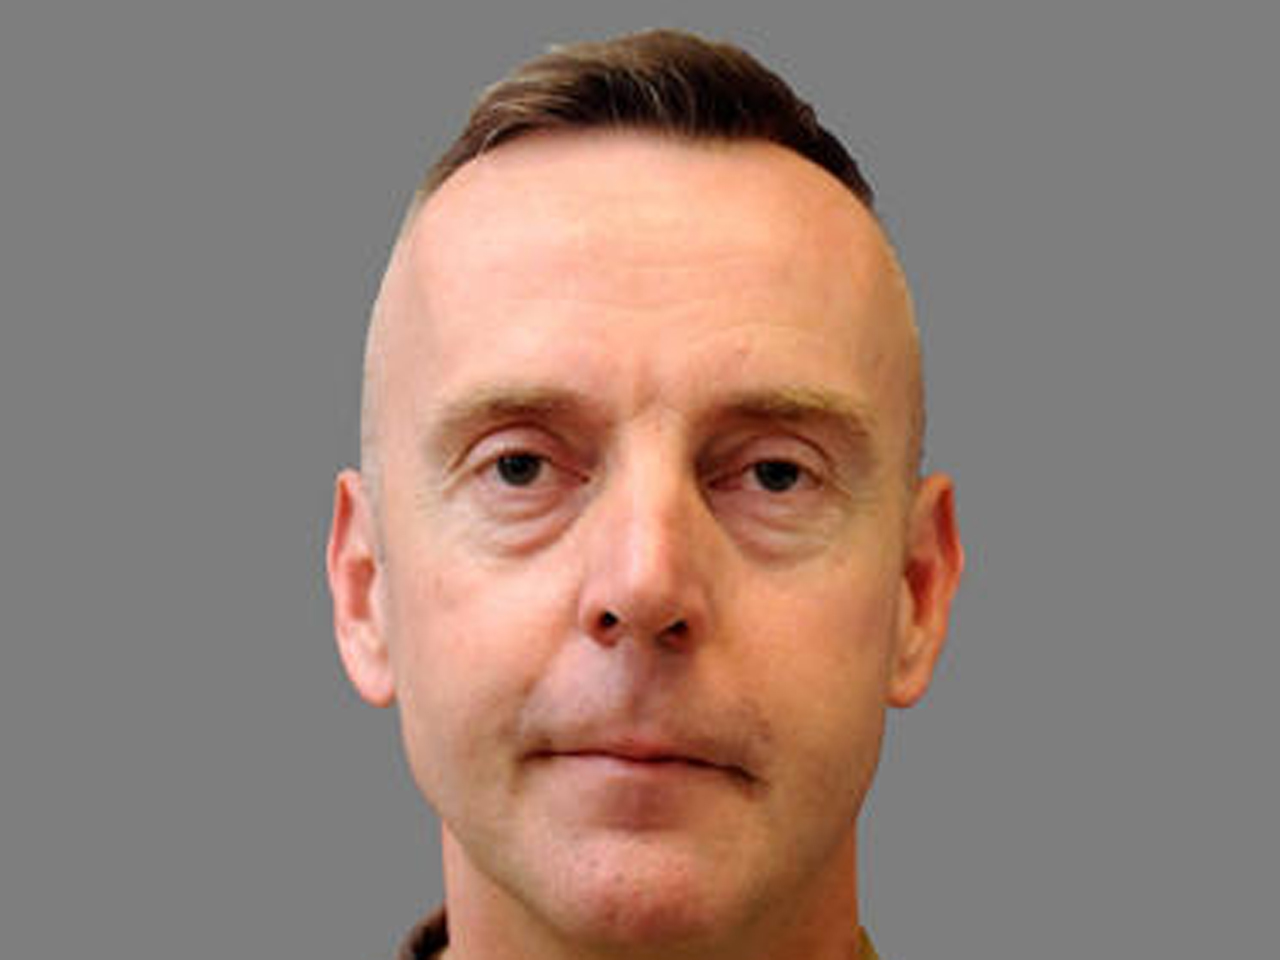 Jeffrey Sinclair Us Army General To Plead Guilty On 3 Charges Deny More Serious Counts Of 5670